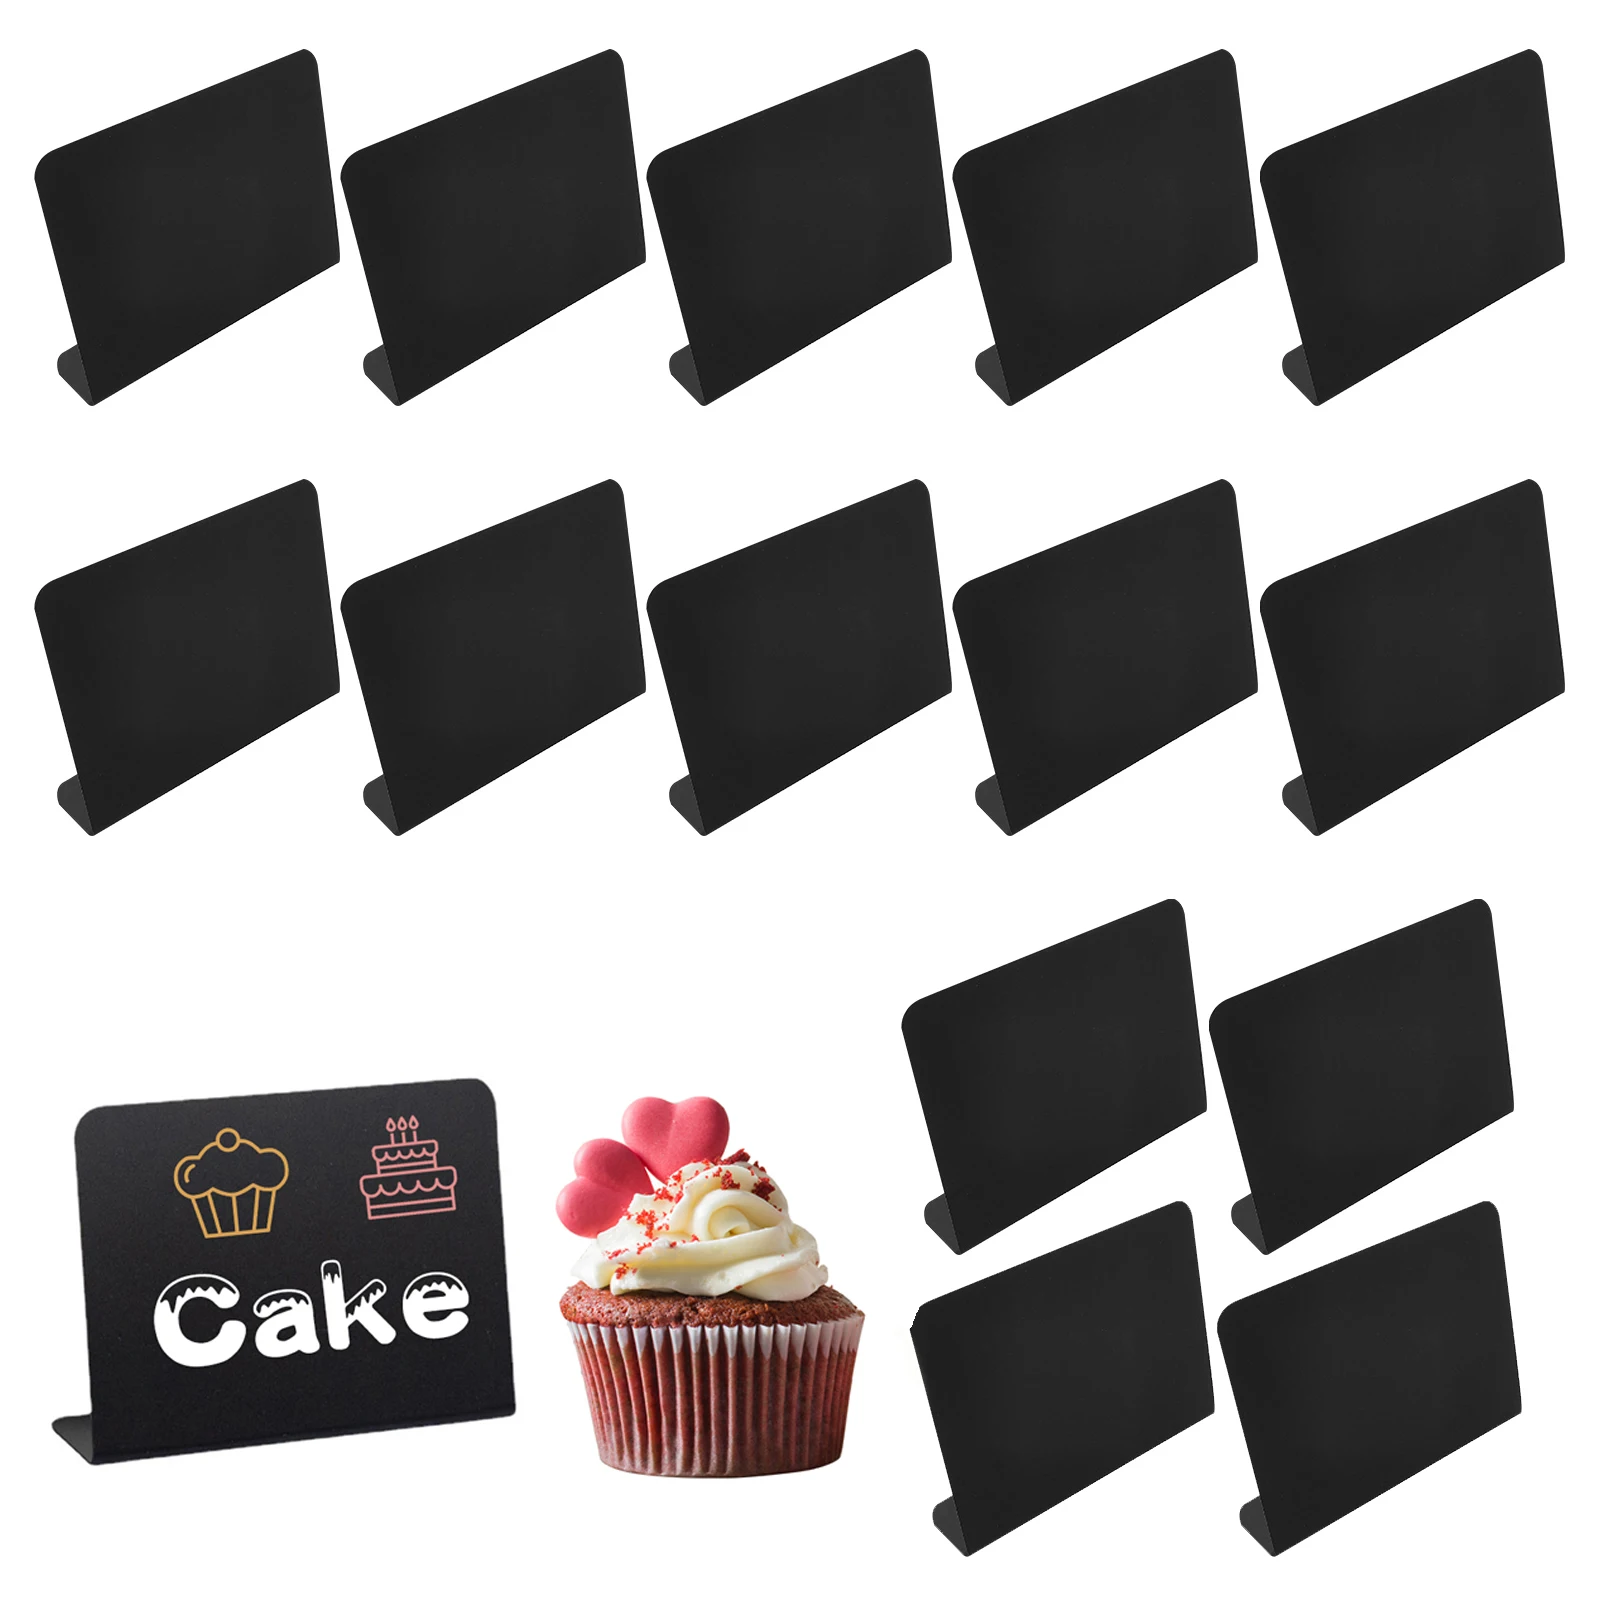 Mini Chalkboard Signs With Stand 12pcs Food Labels For Buffet Wooden Labels  Table Numbers Price Signs Party Signs Stands For Food Bar Cafe Bakery With